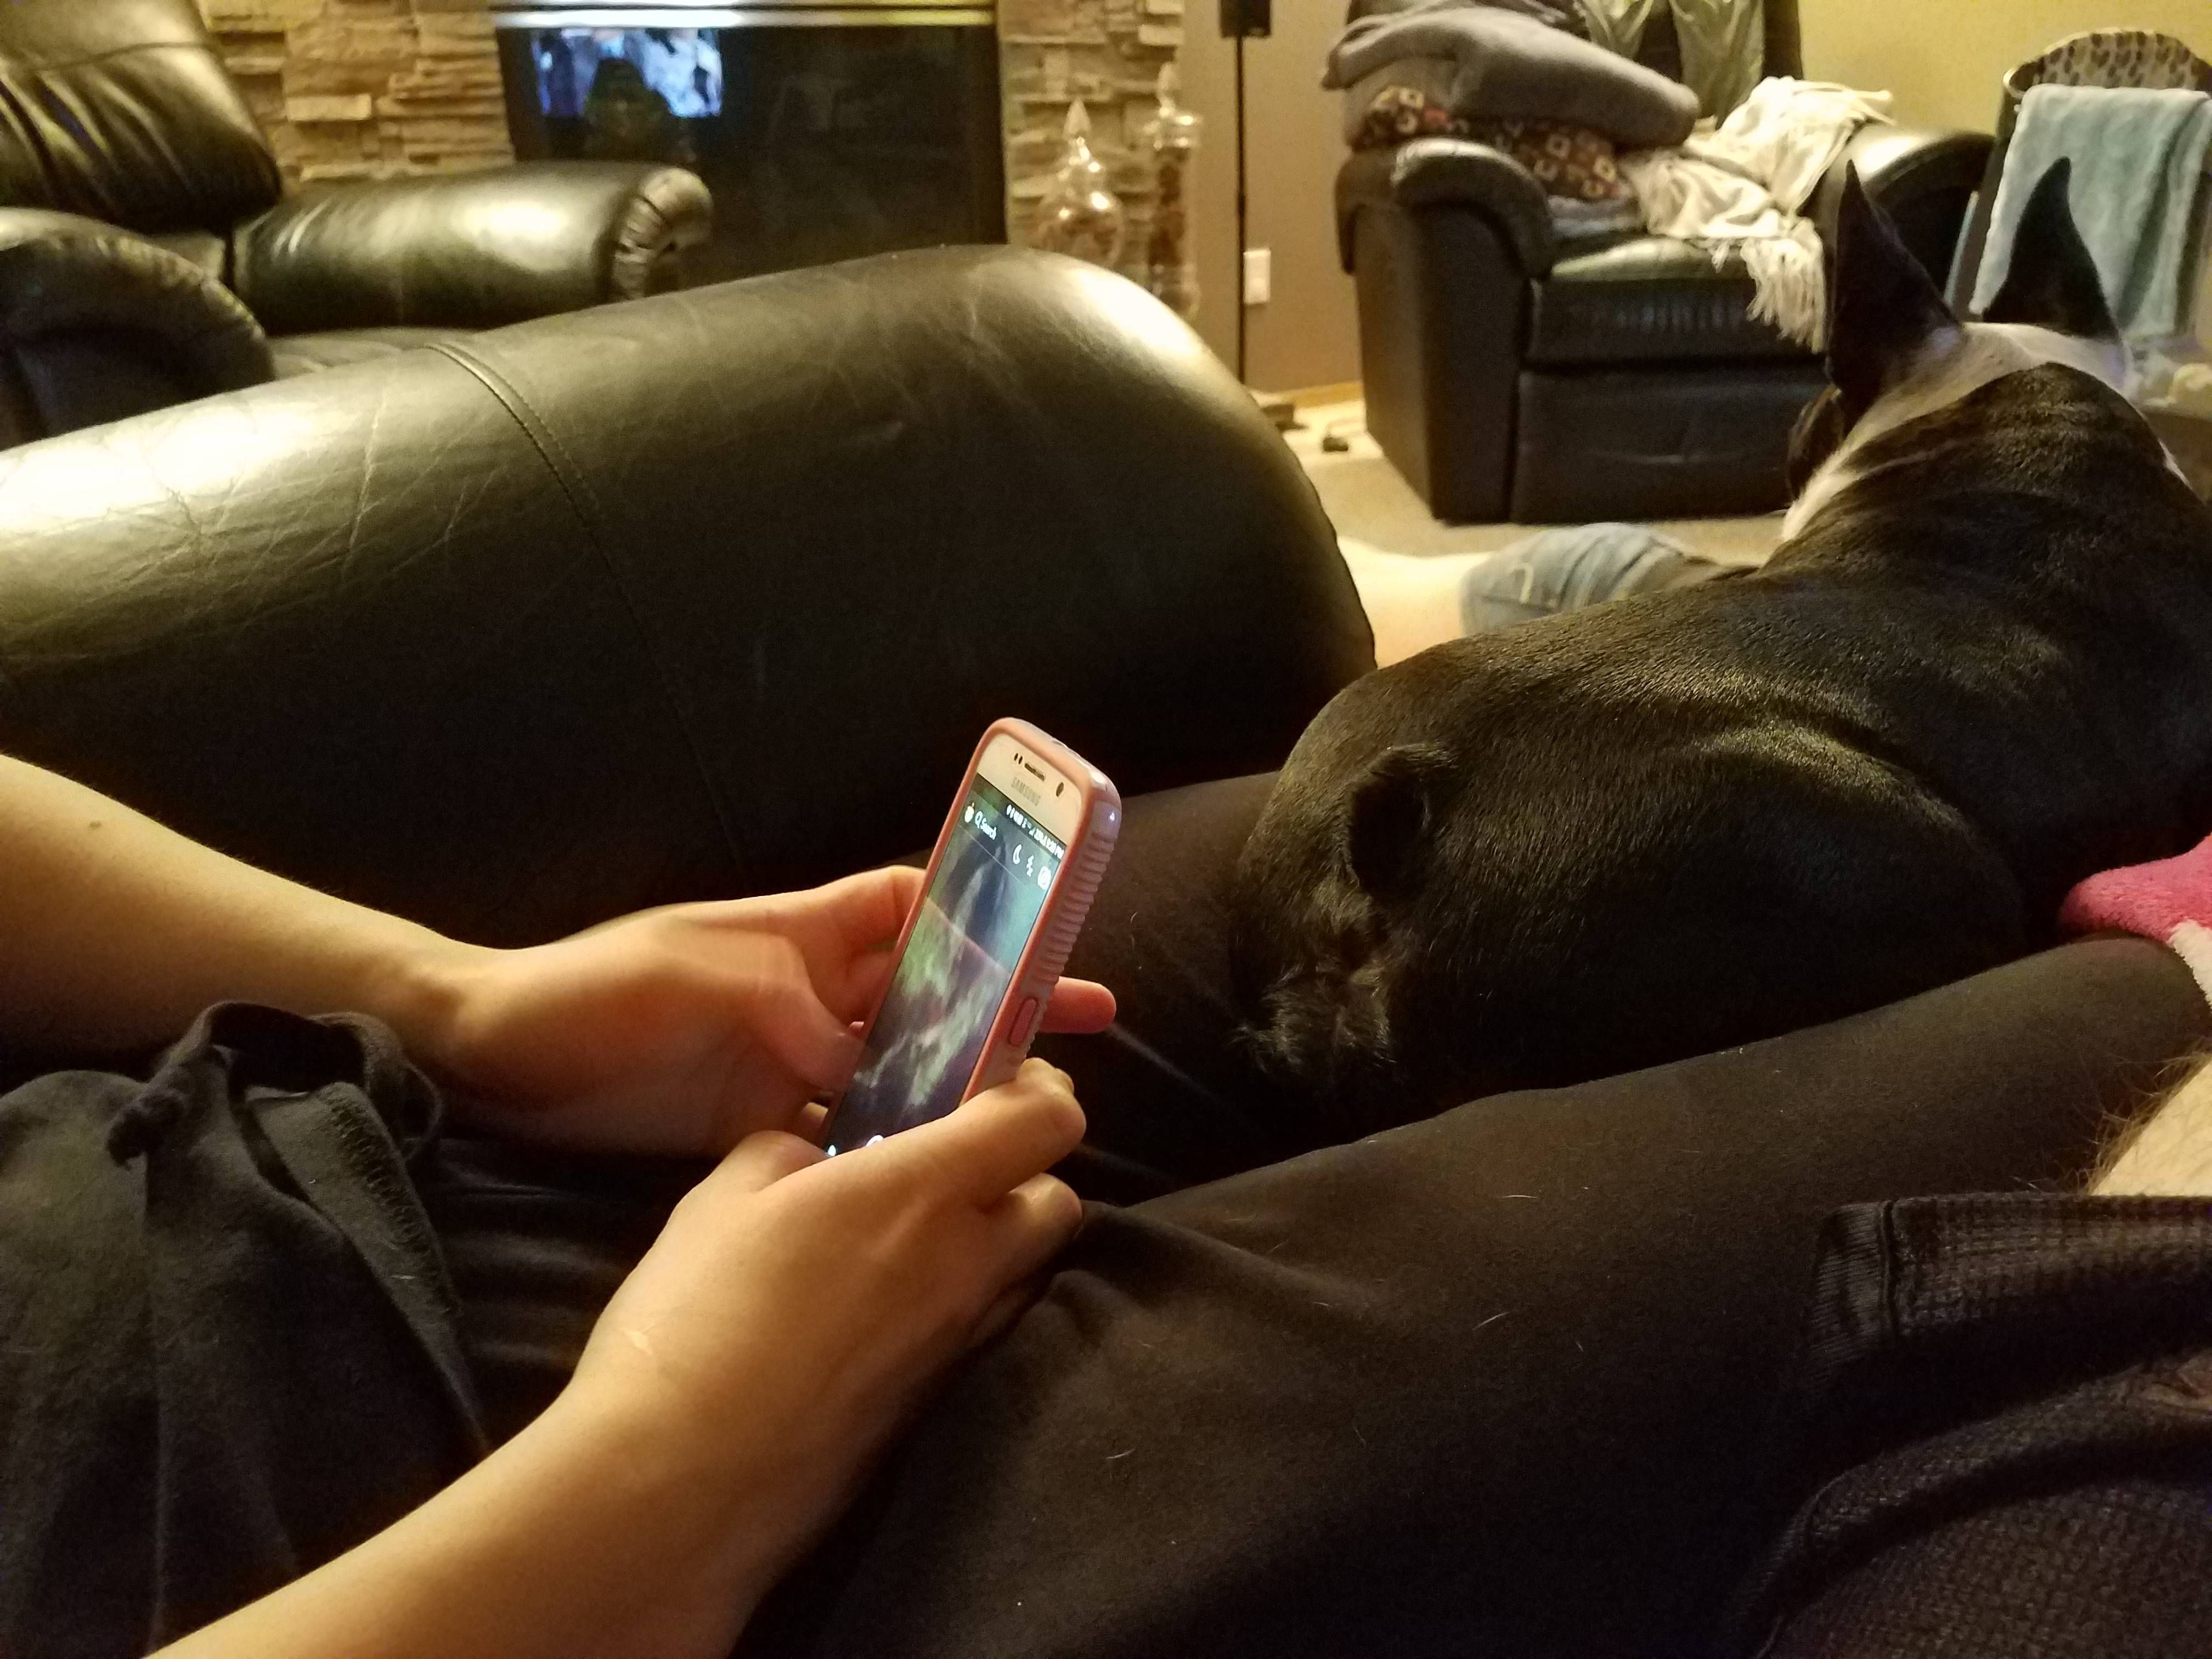 I caught my fiancée taking a picture of our dog's butthole